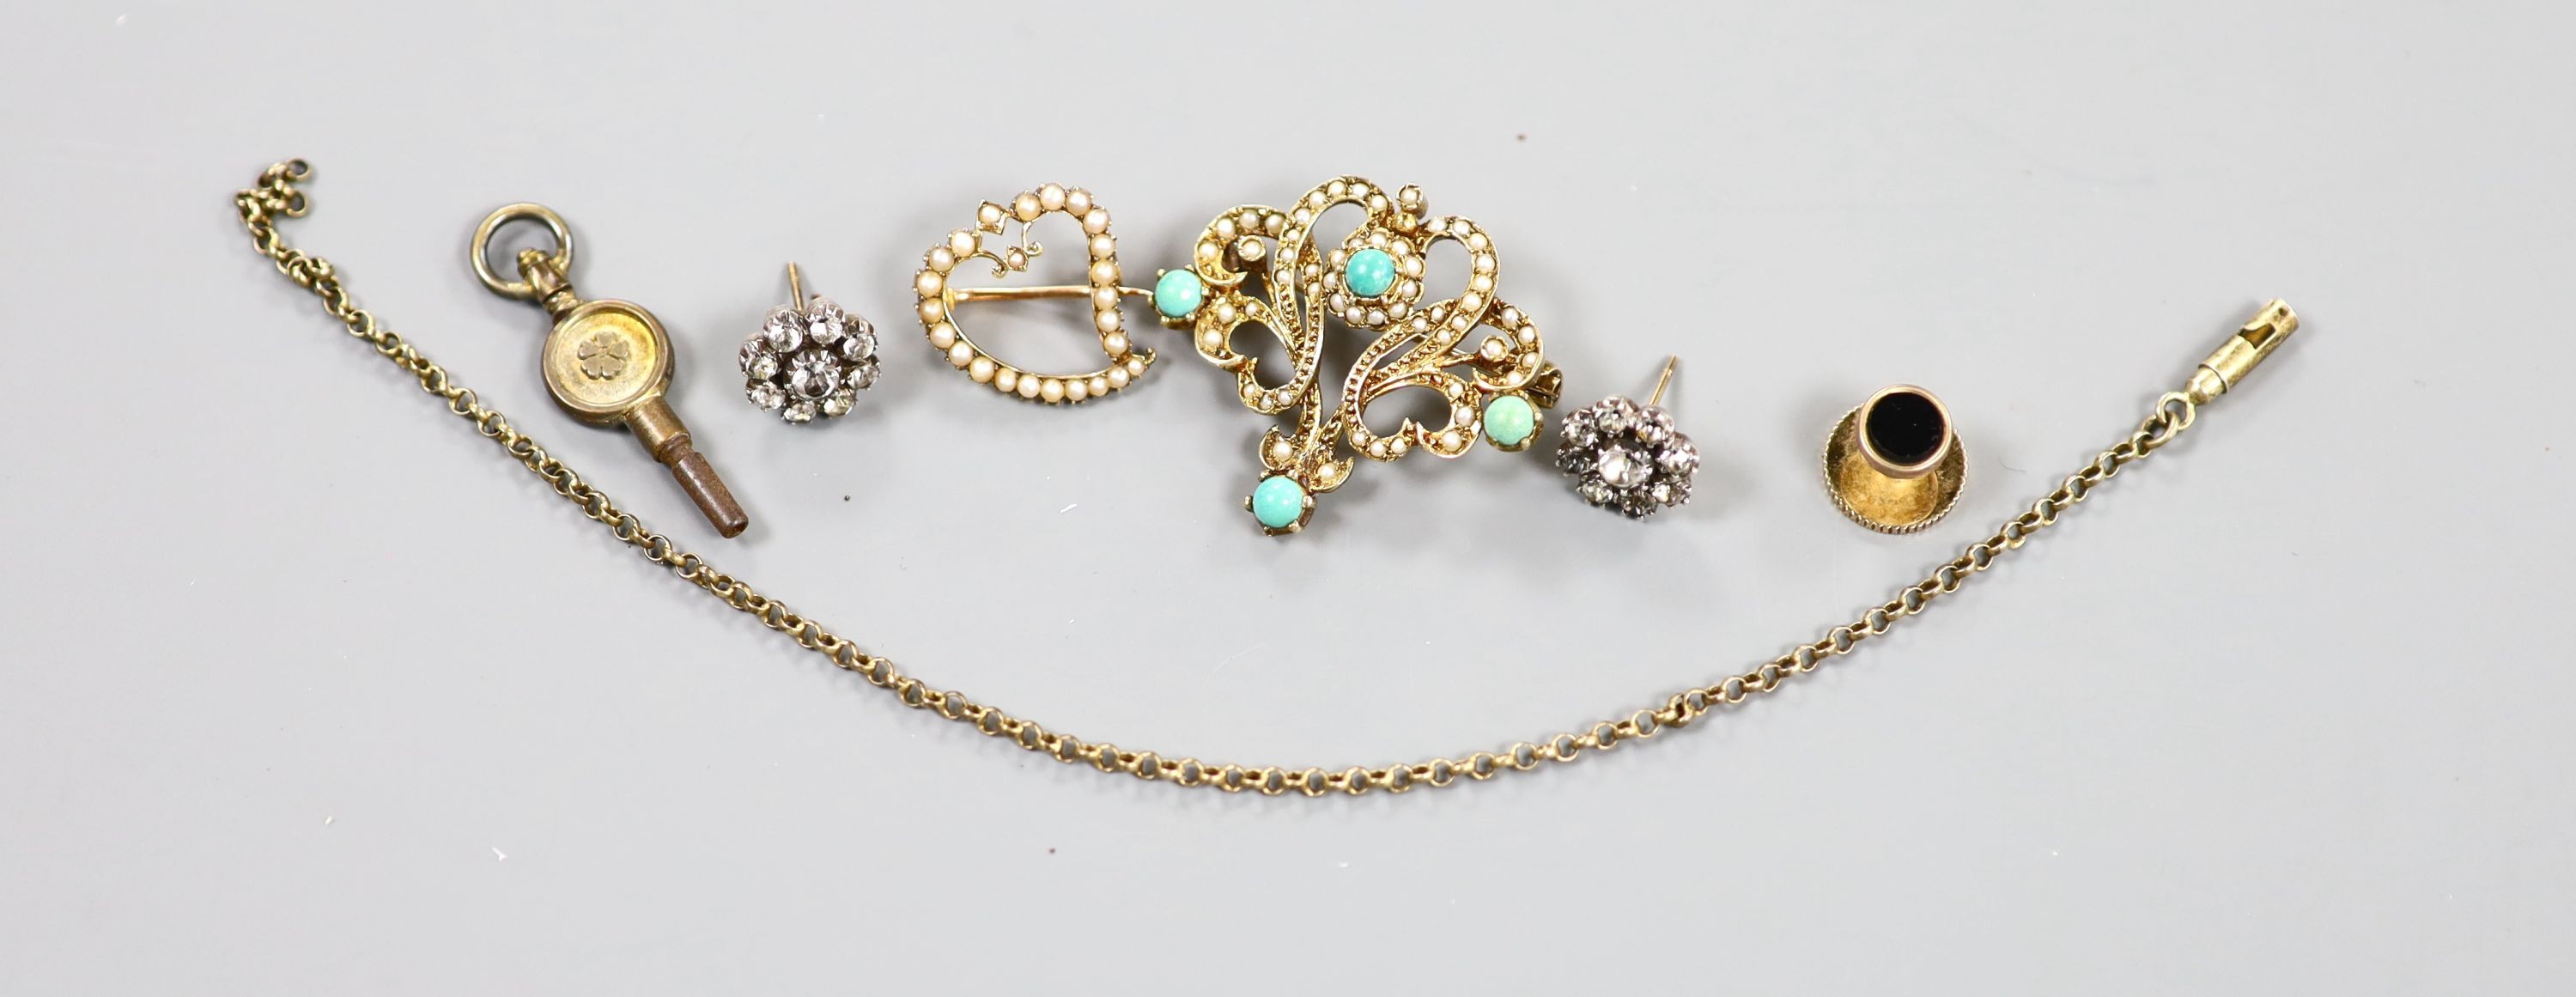 An Edwardian 15ct and seed pearl set open work heart brooch, 18mm, gross 2.1 grams, a modern 9ct gold, seed pearl and faux turquoise set scroll brooch, 32mm, gross 6.2 grams and five other items including a watch key and